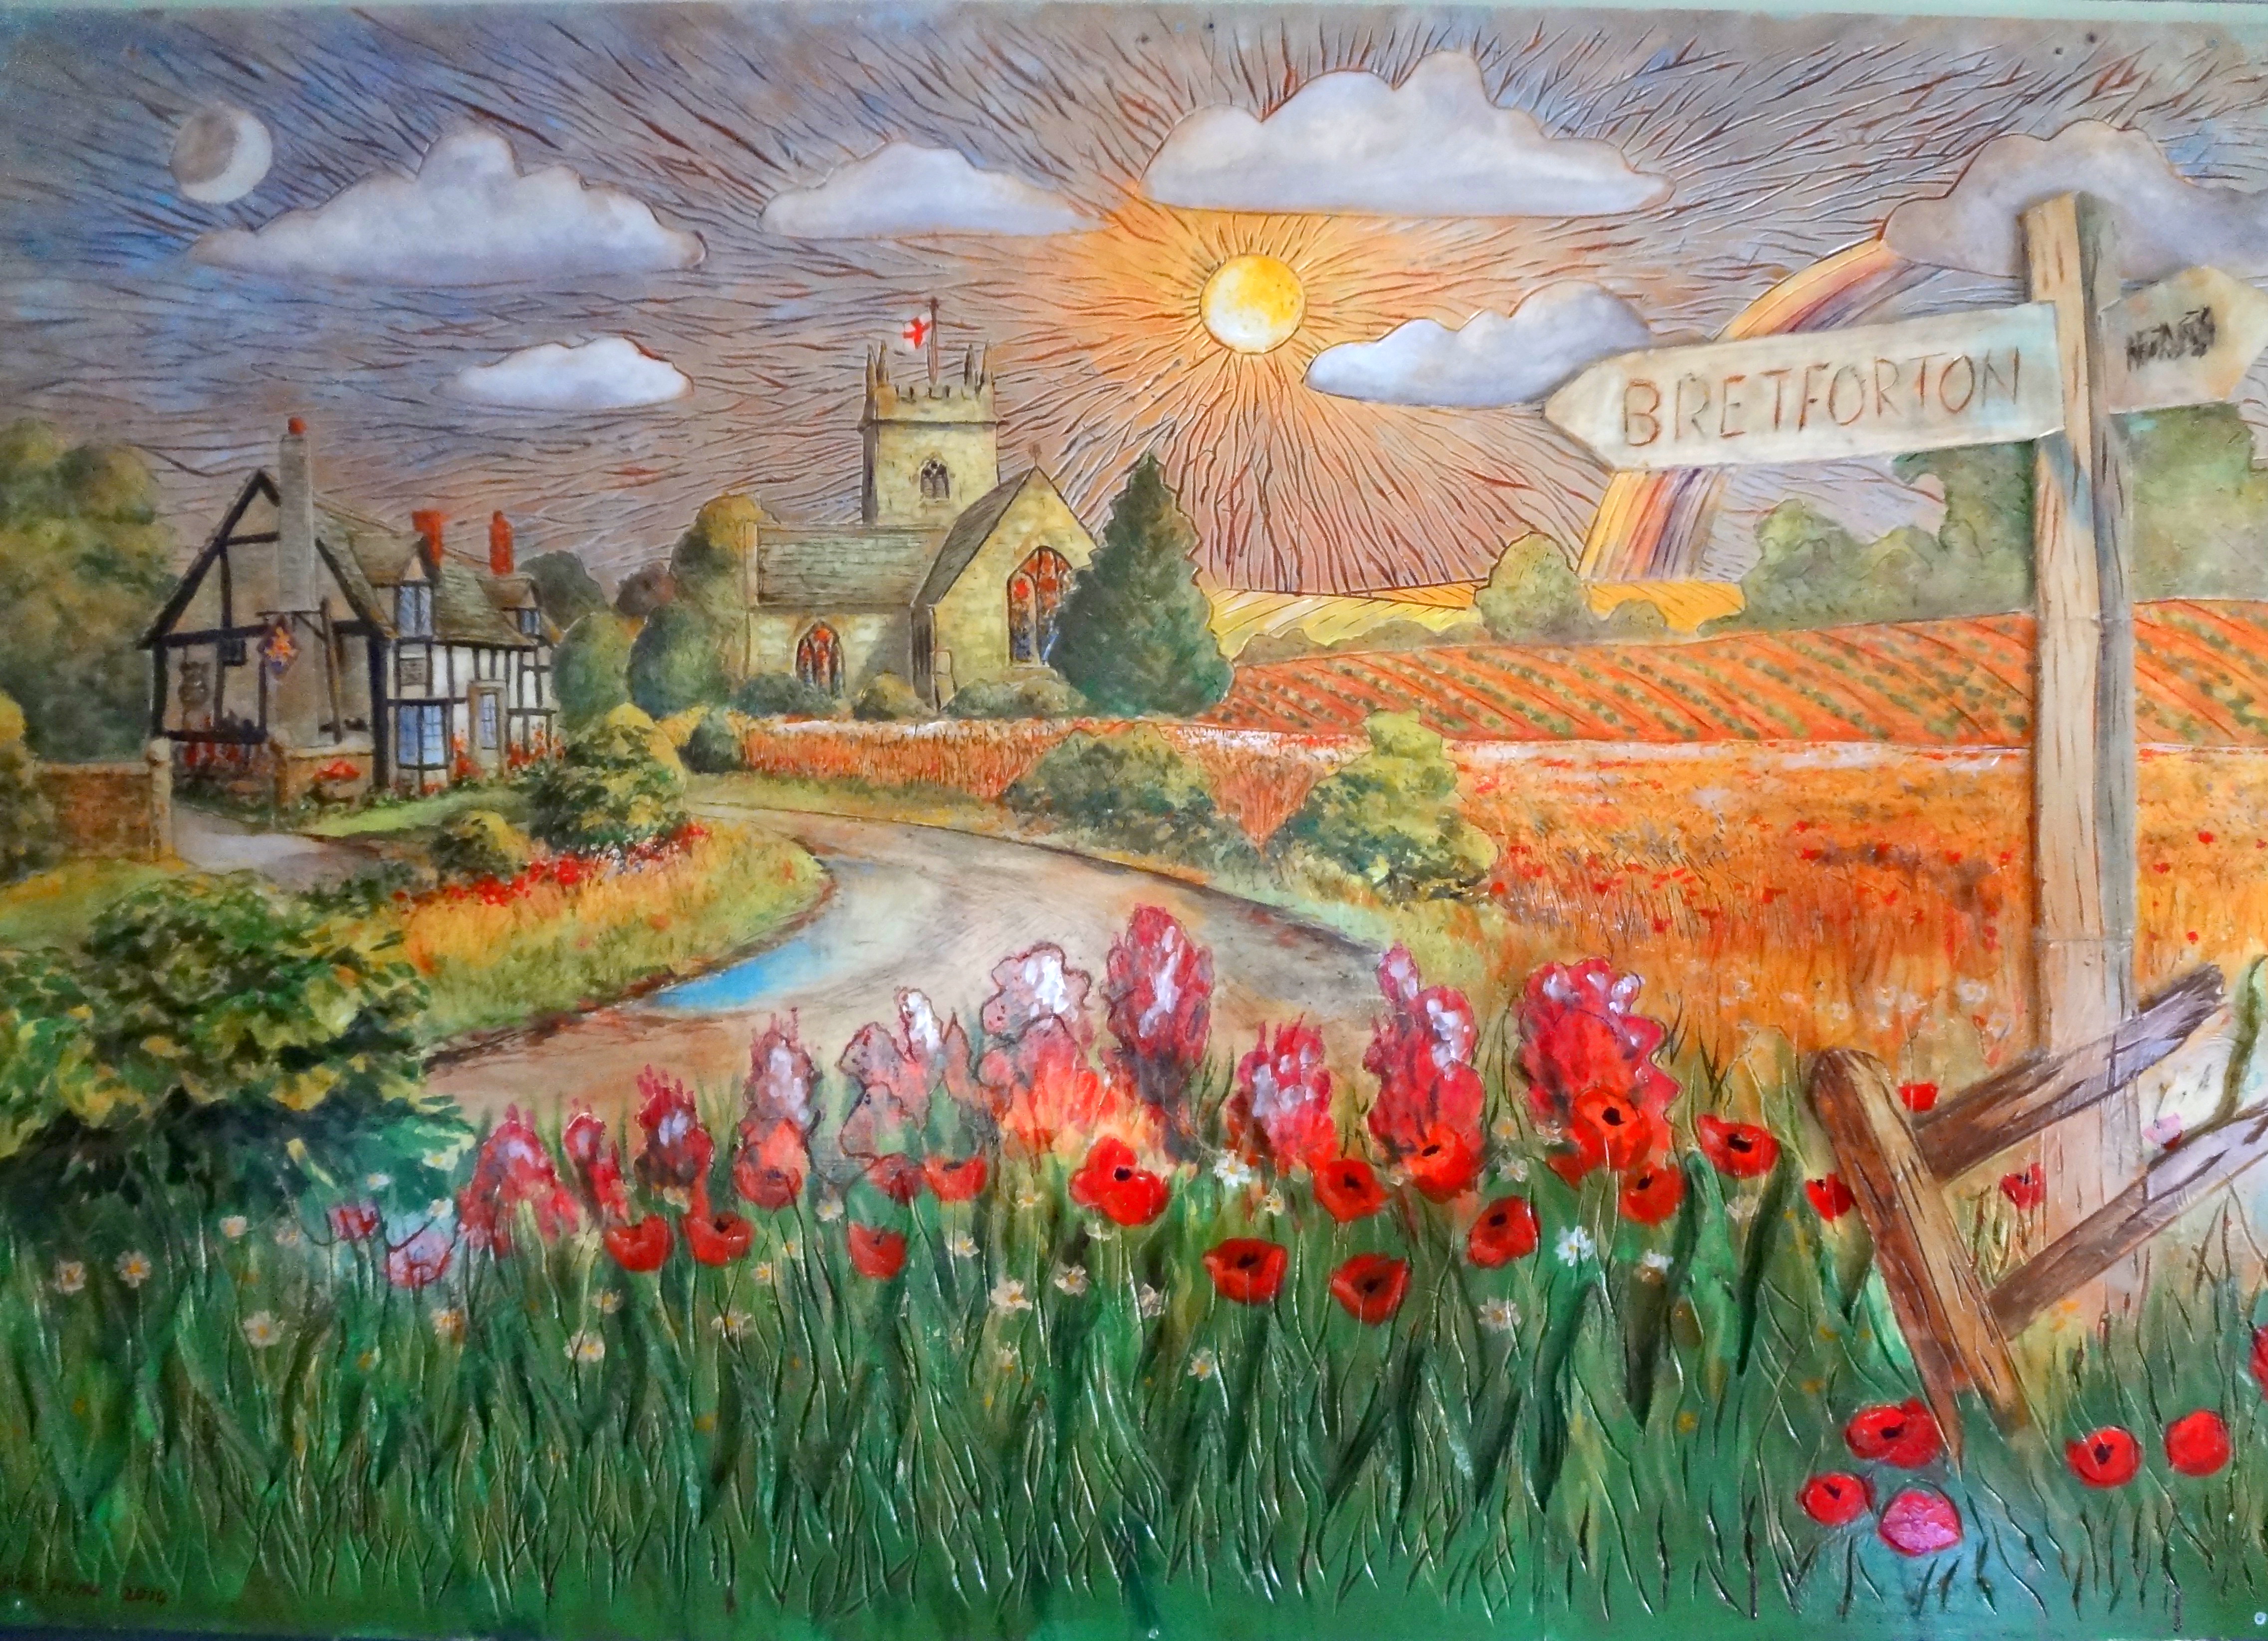 A colourful painting of Bretforton